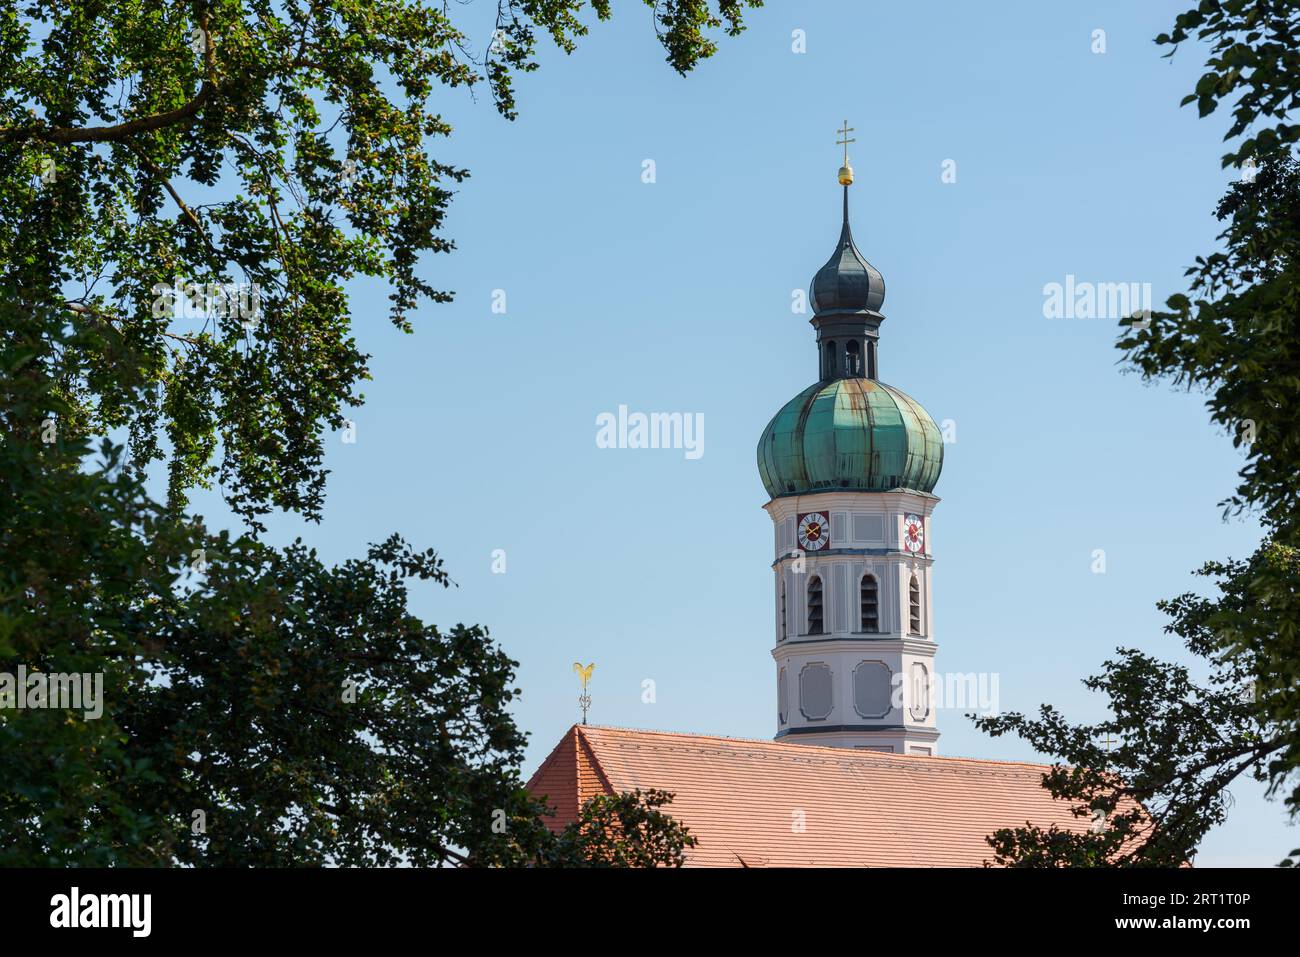 City of Dachau in Upper Bavaria, tower of St. Jacob's Church, blue sky in summer Stock Photo